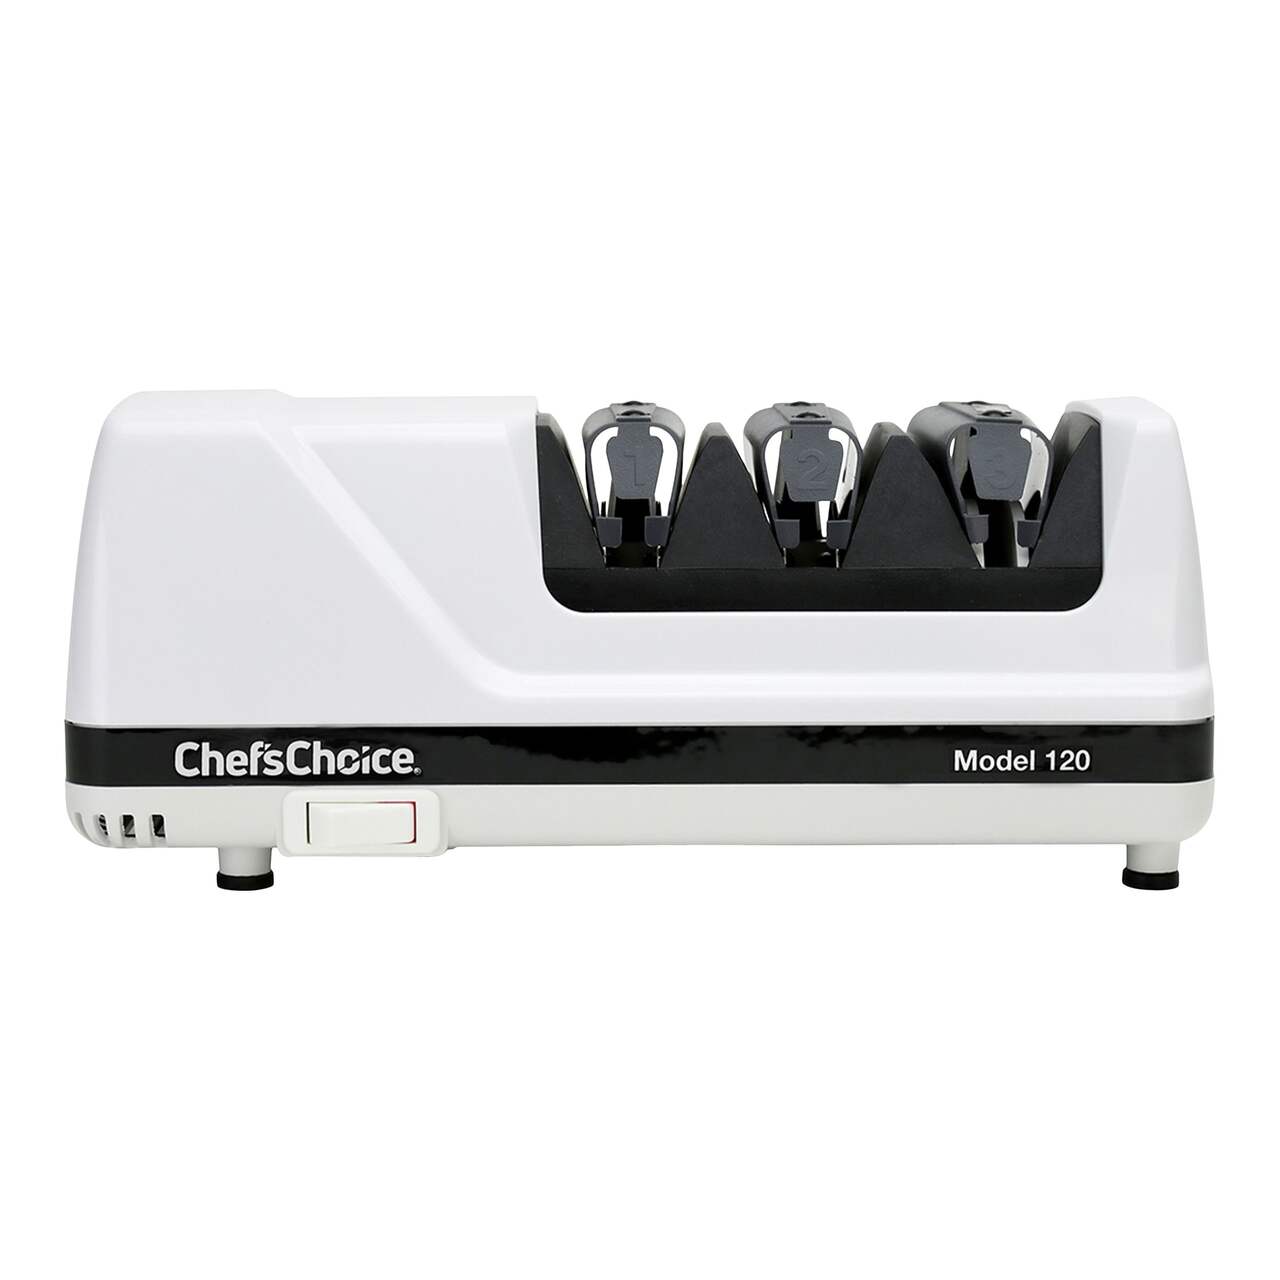 Chef's Choice Model 120 Professional 3-Stage Electric Knife Sharpener